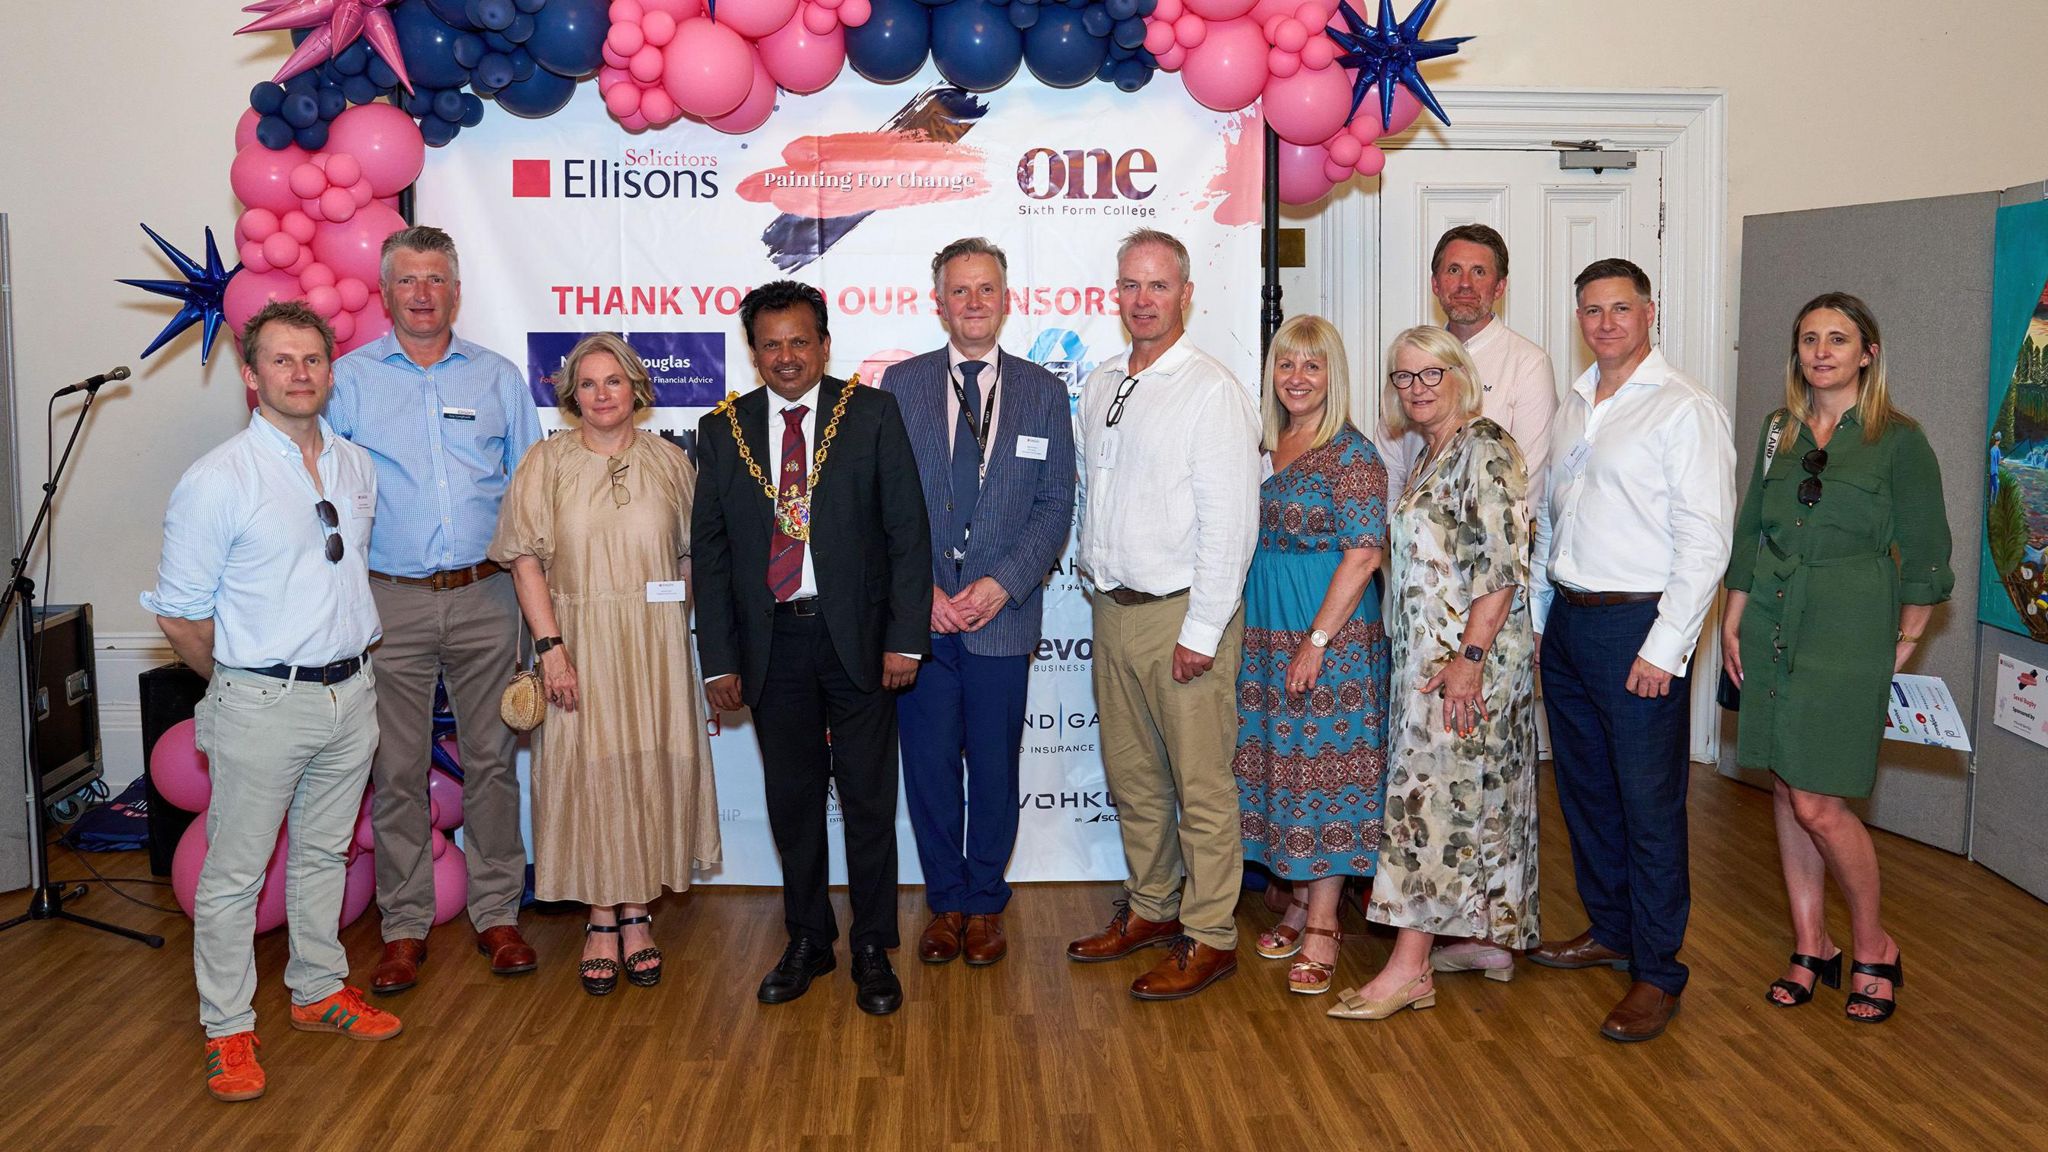 Ipswich mayor Elango Elavalakan wearing a suit and mayoral chain standing in a line with workers from Ellisons Solicitors at Ipswich Town Hall. Behind them are pink balloons and a screen that reads "Thank you to our sponsors".